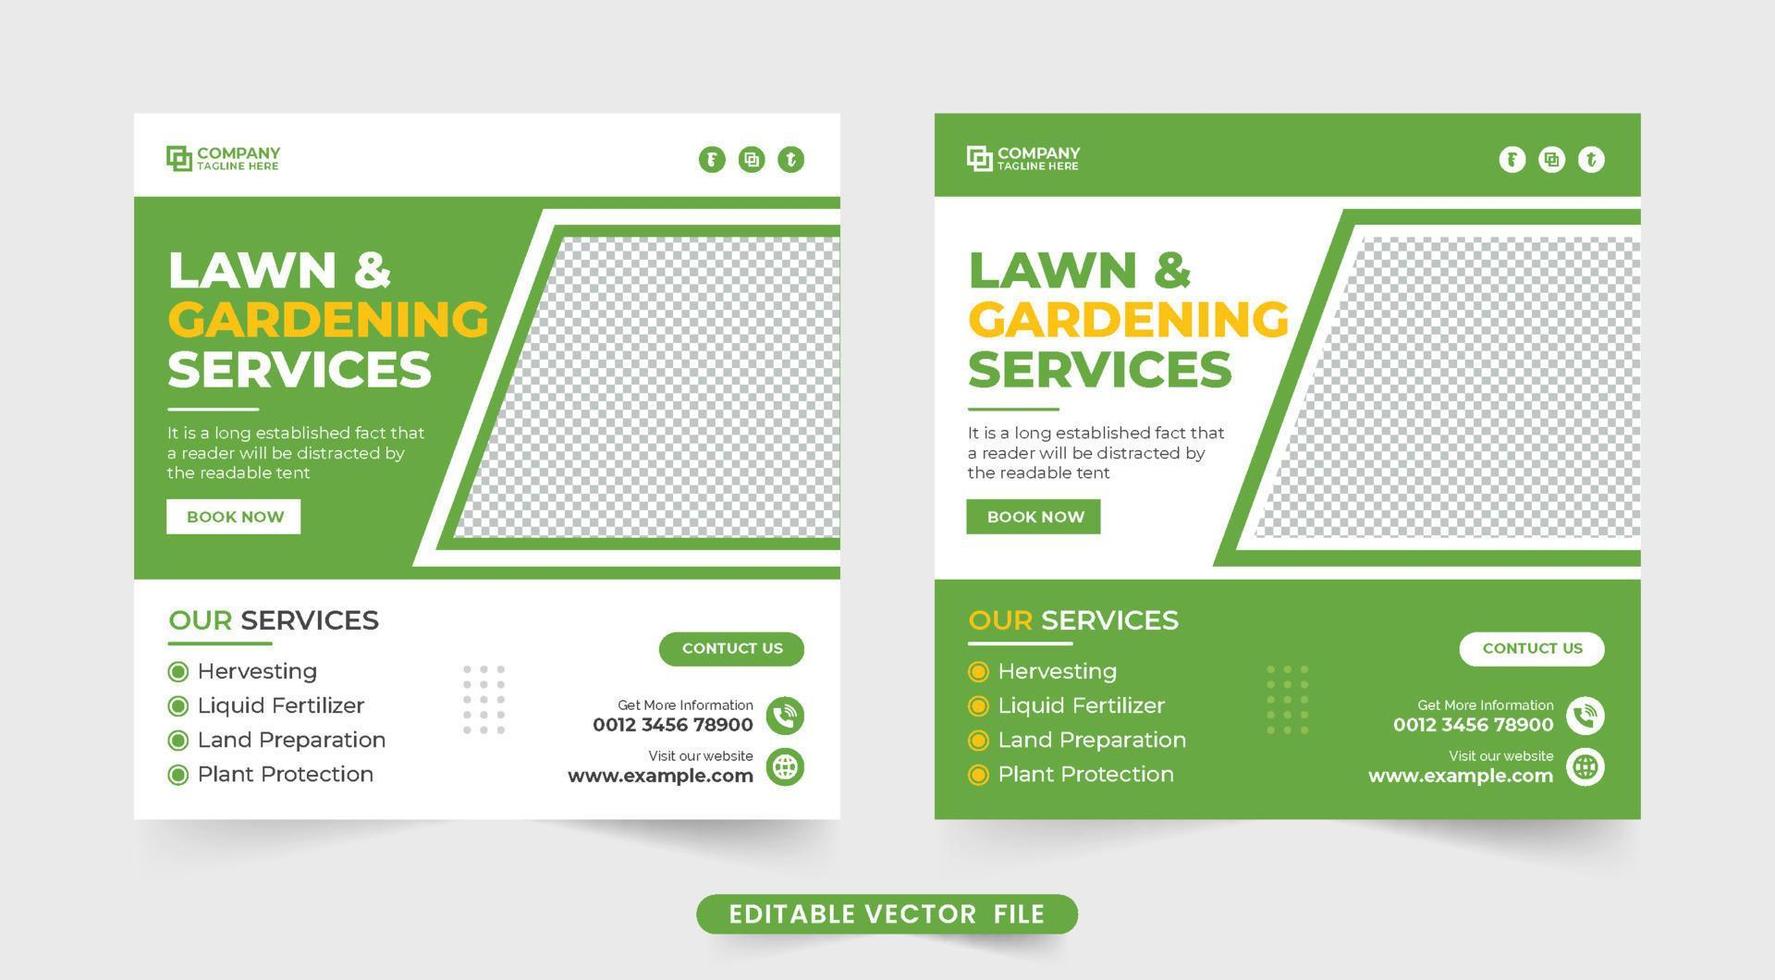 Garden care service and lawn mower business promotion template. Lawn mower and landscaping service social media post vector with green and yellow colors. Agro farming business web banner template.